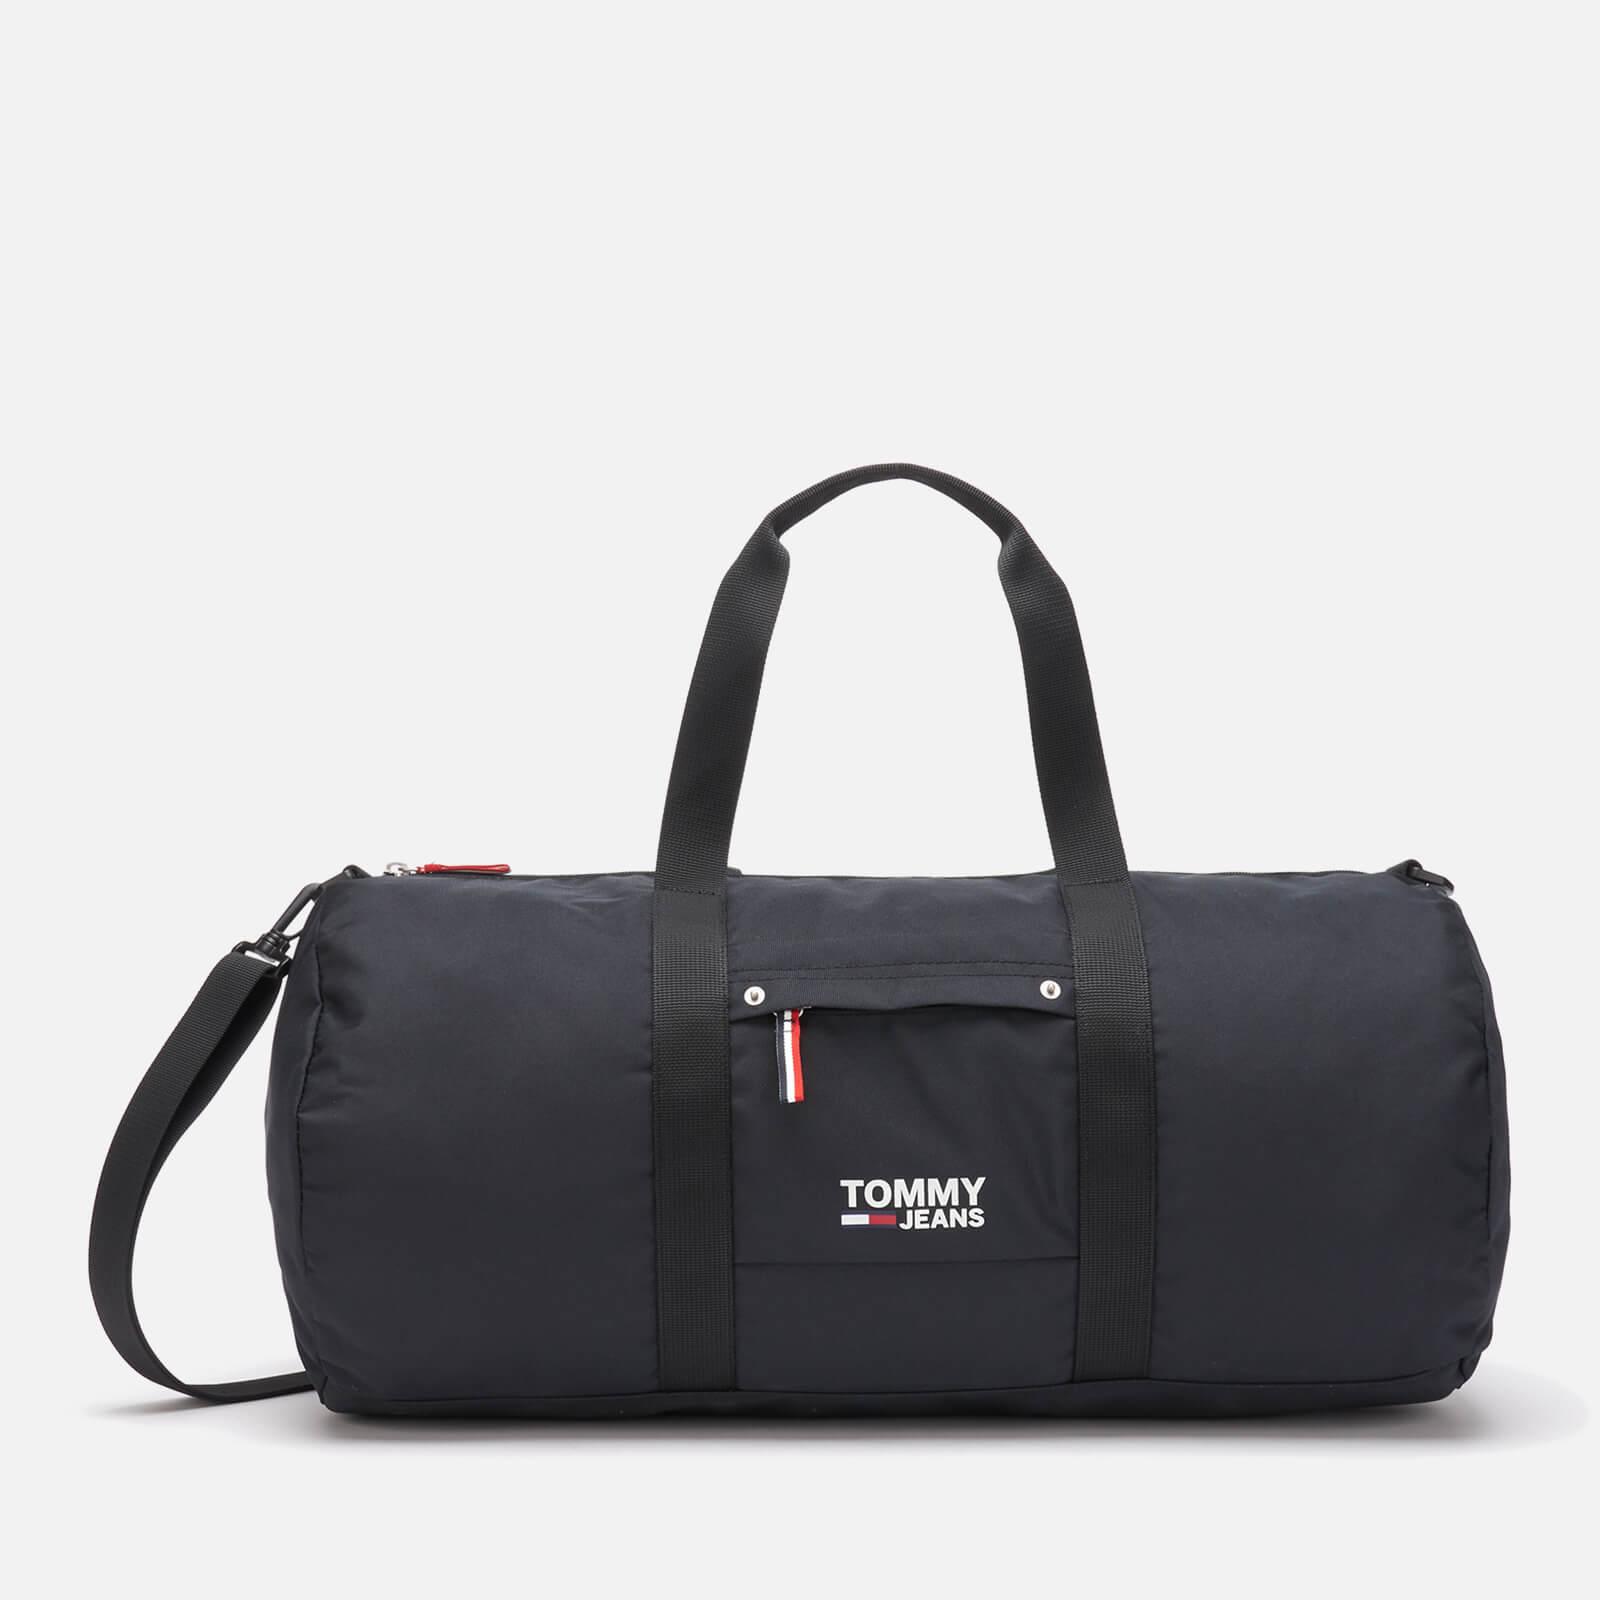 Tommy Hilfiger Cool City Duffle Bag in 